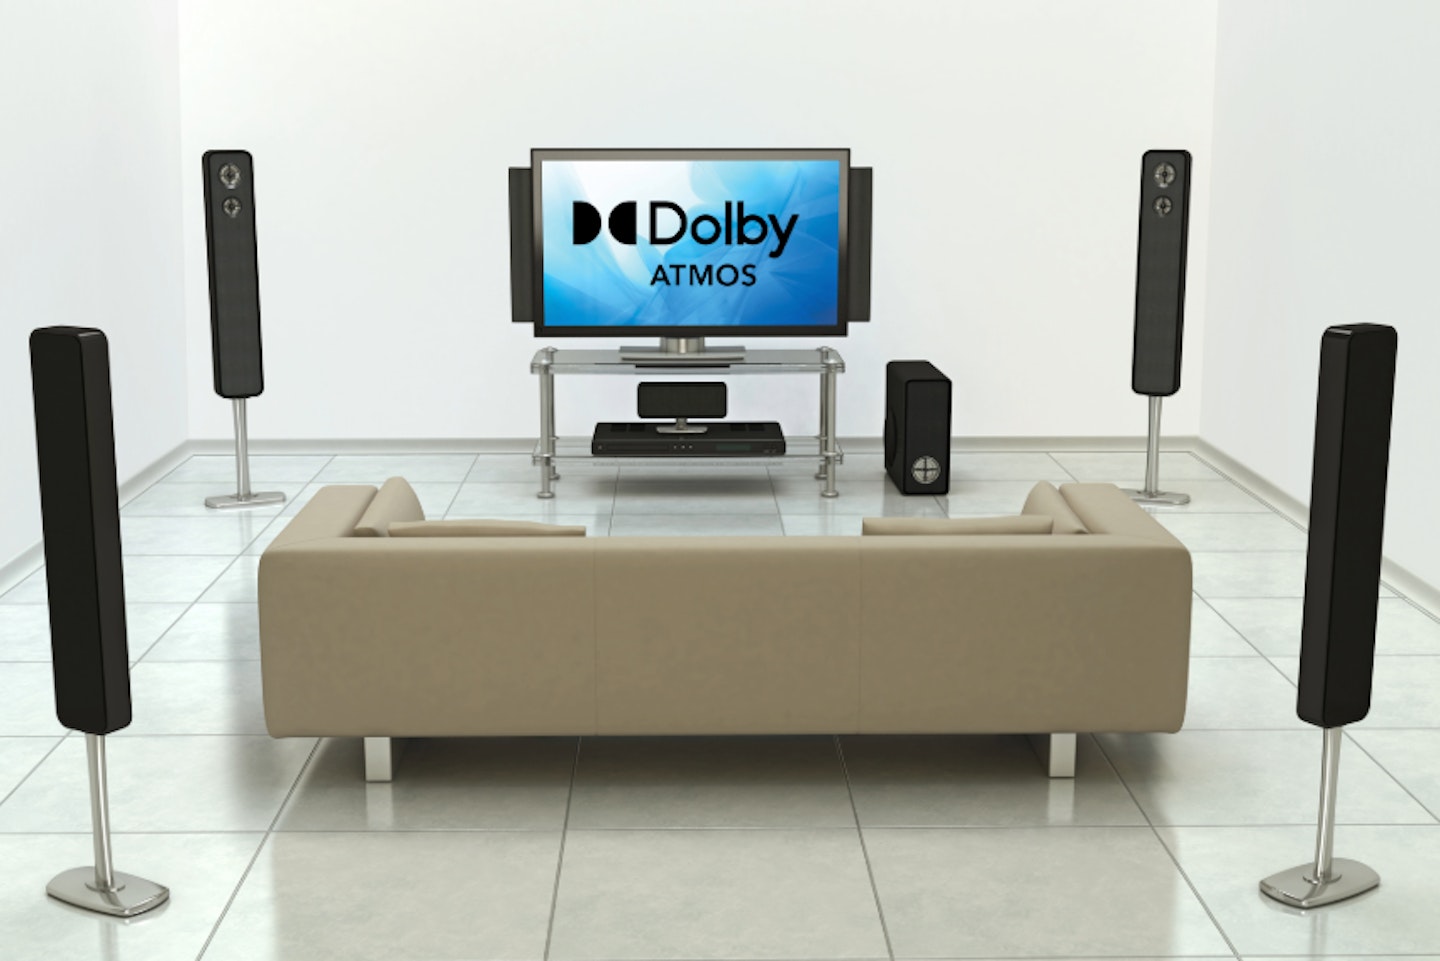 a dolby atmos speaker system